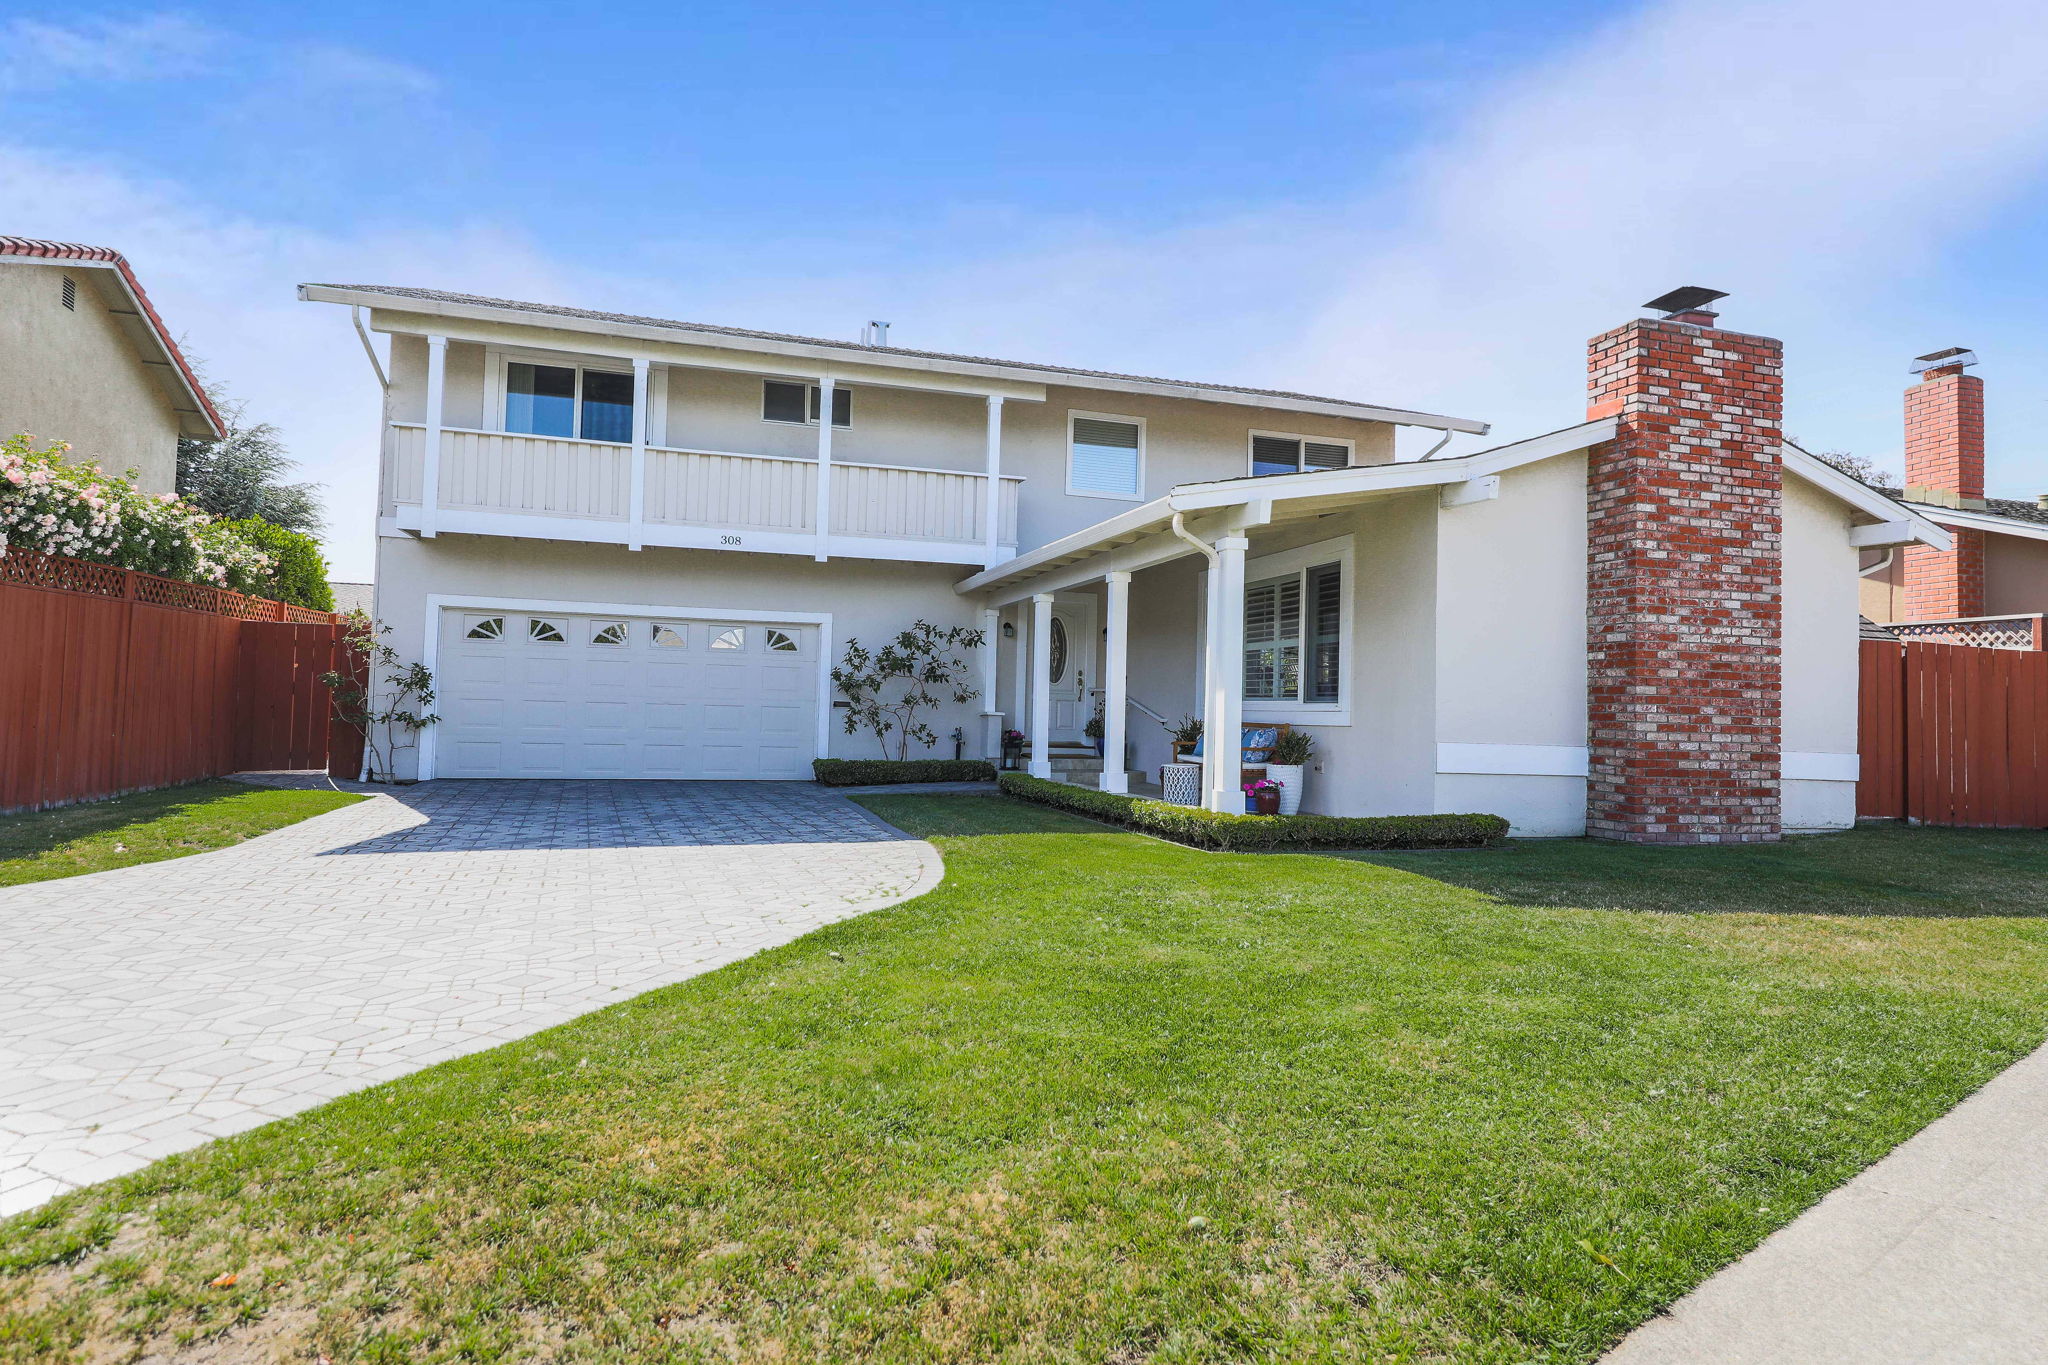  308 Bowfin St, Foster City, CA 94404, US